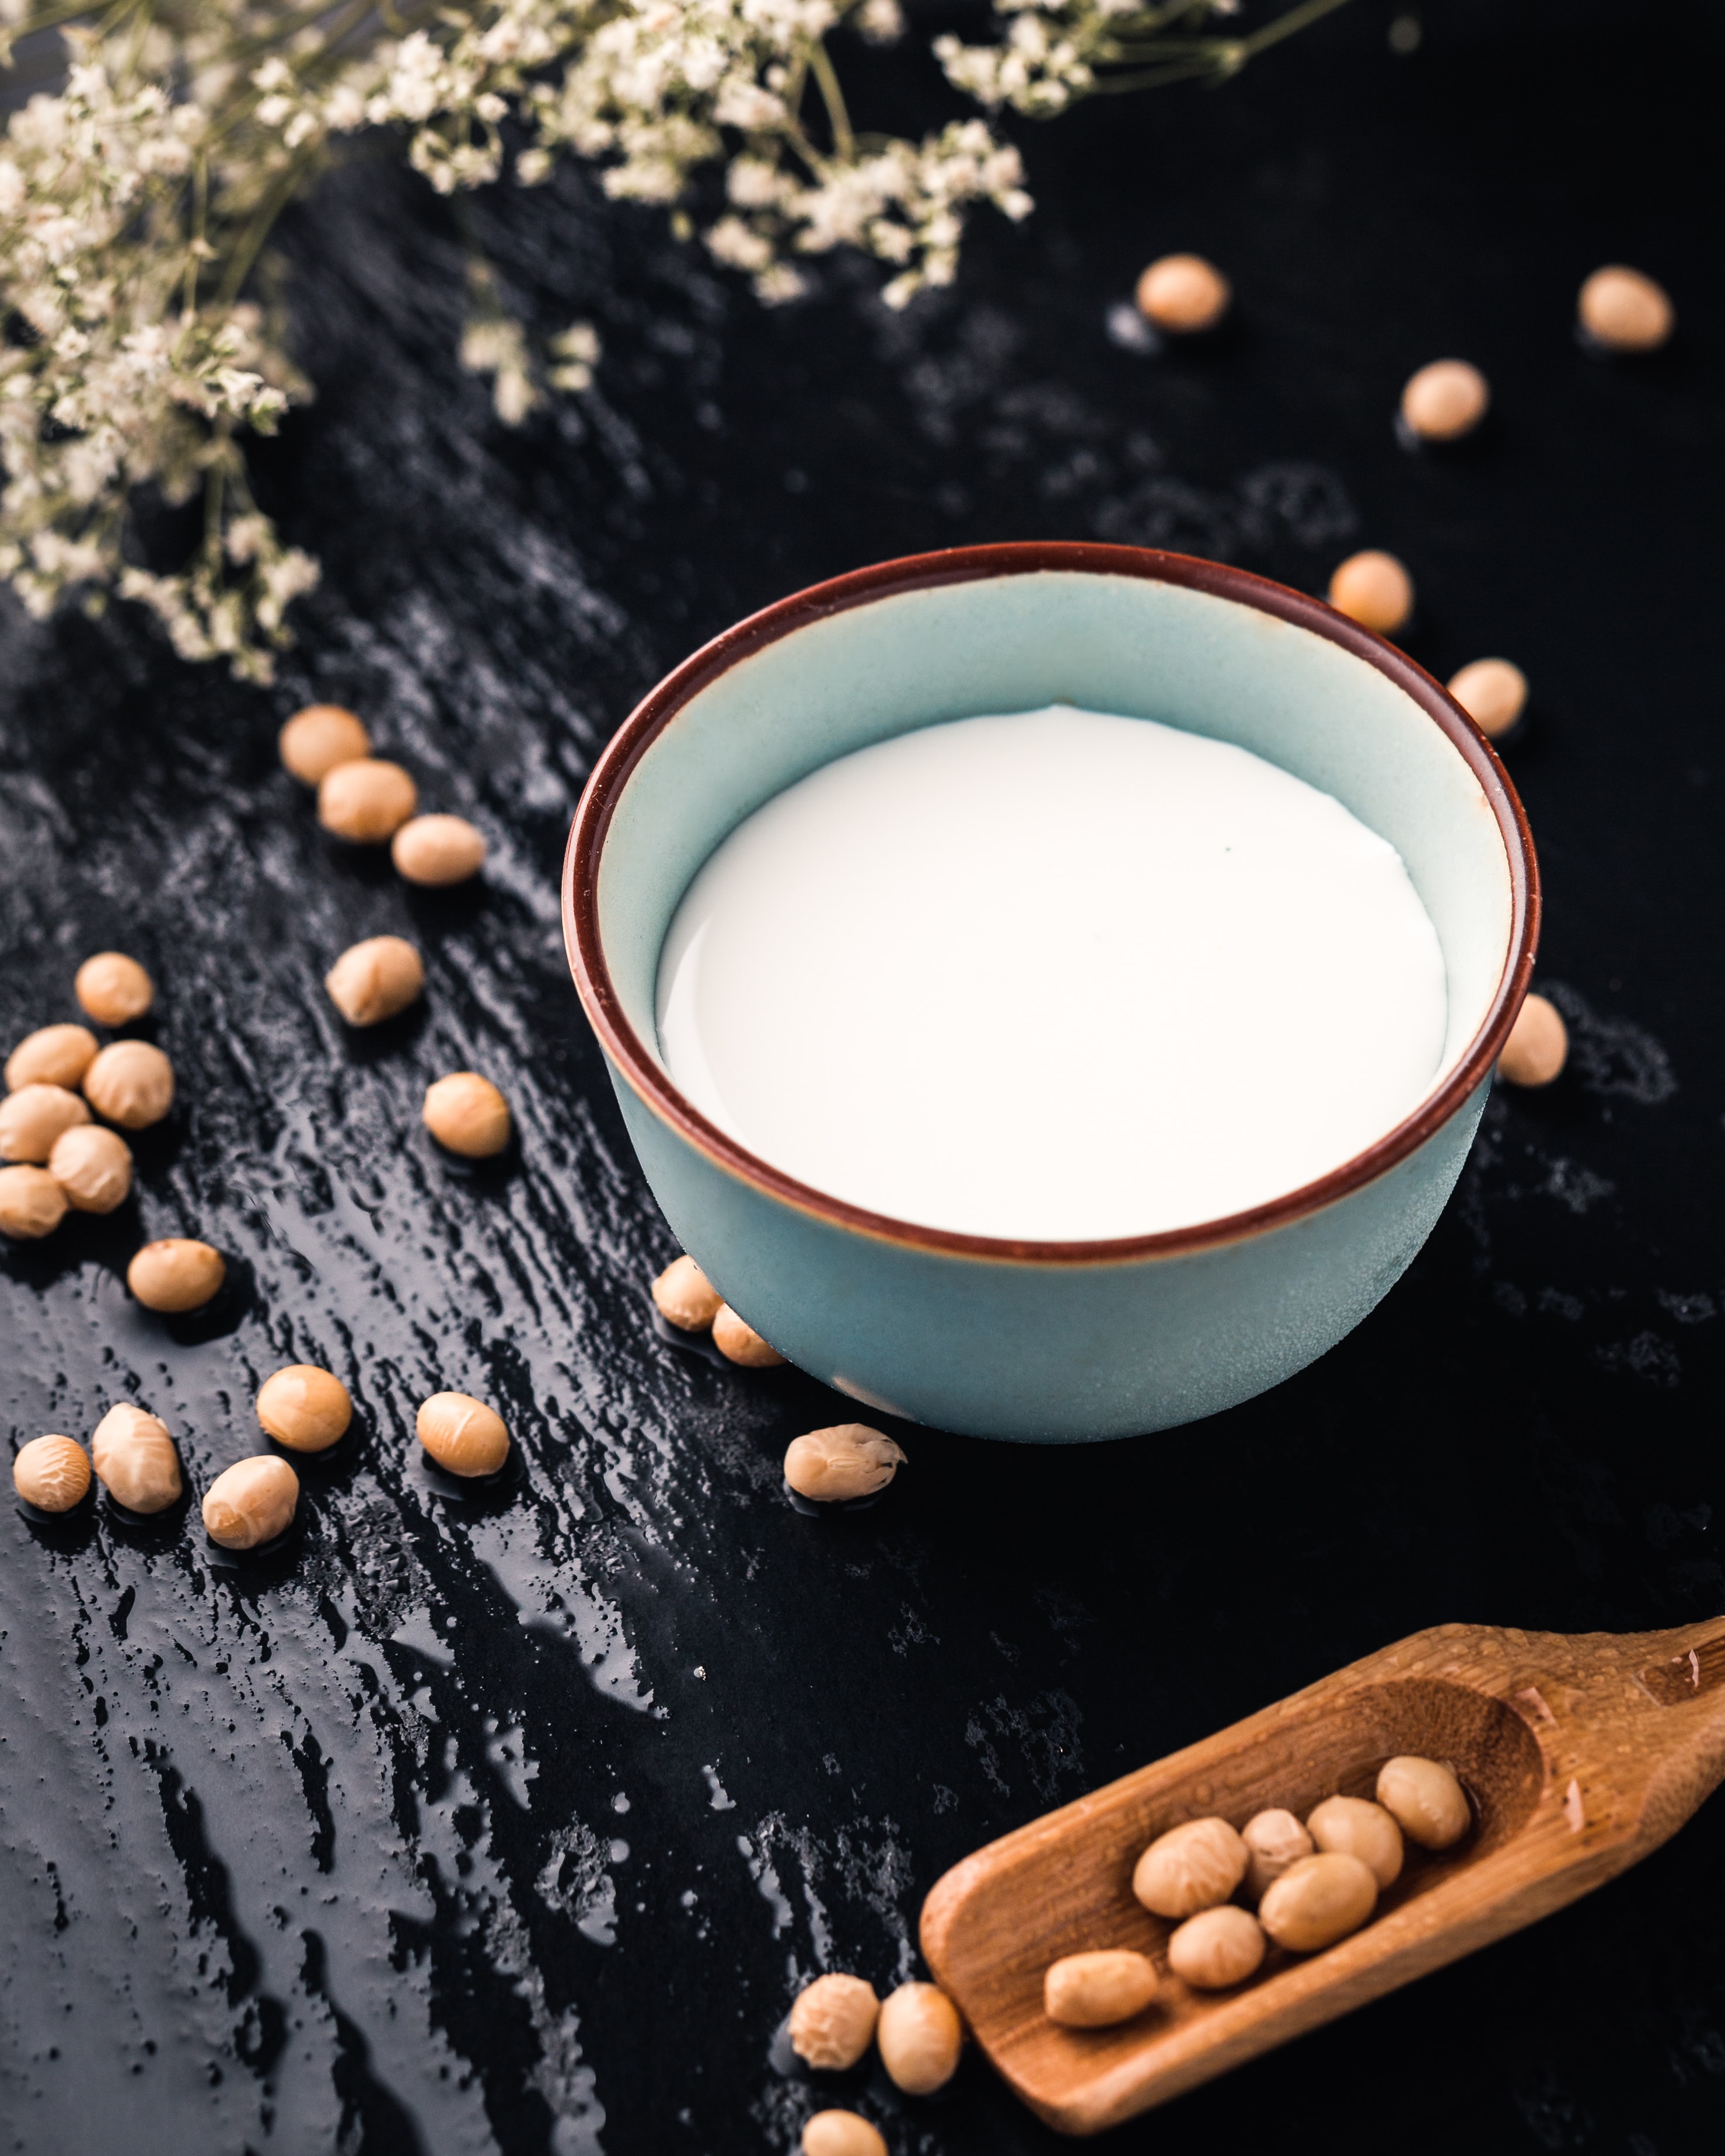 How To Make Soya Milk At Home